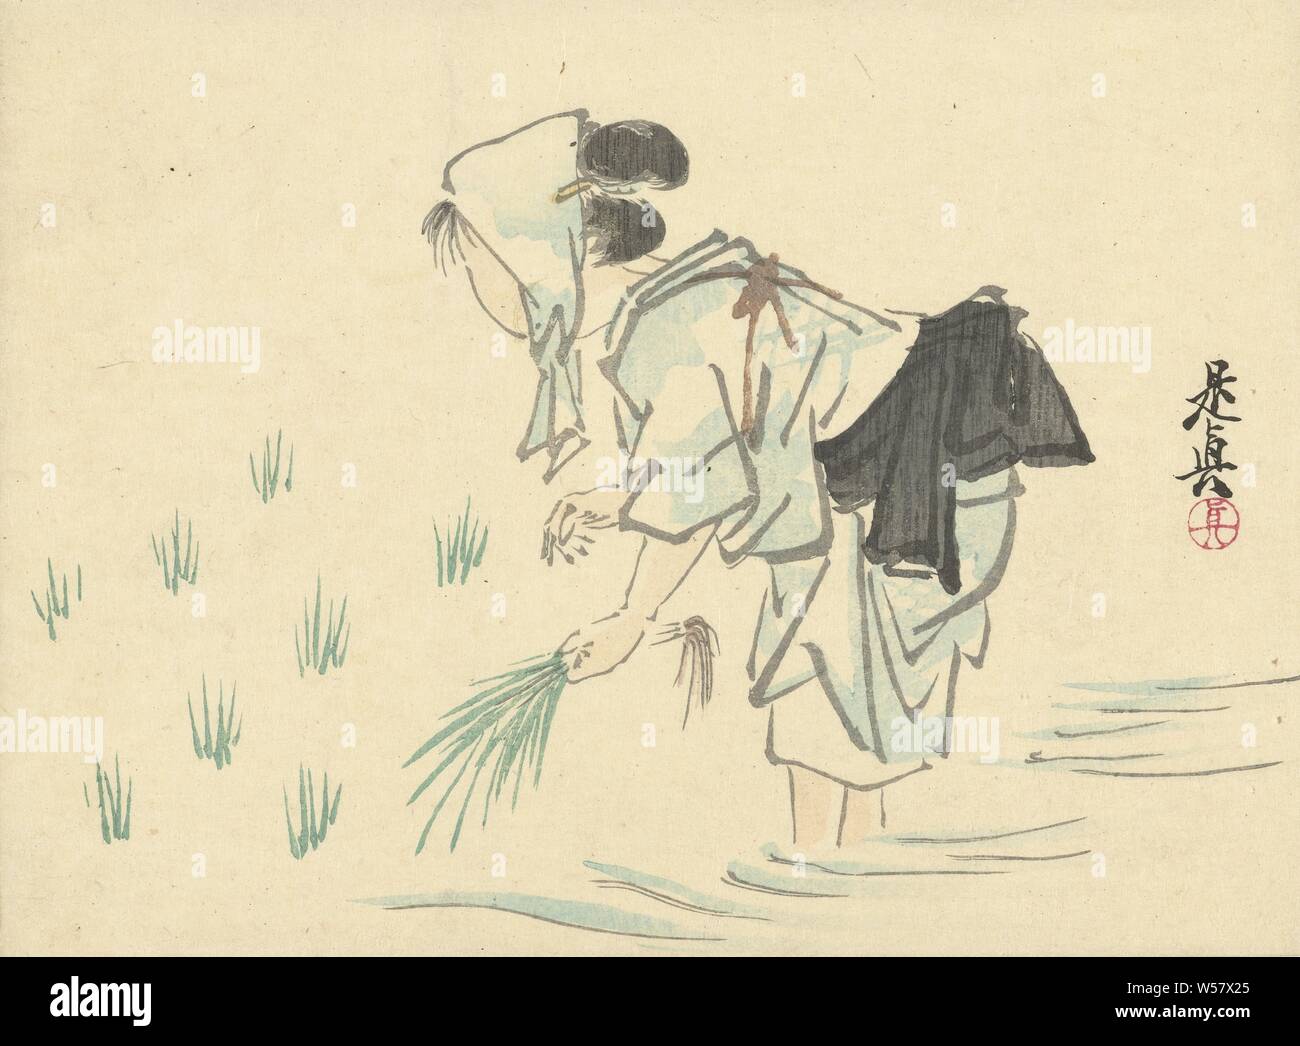 Woman planting rice, transplanting, setting out plants, plants and herbs (with NAME), Shibata Zeshin (mentioned on object), Japan, 1878 - 1882, paper, colour woodcut, h 181 mm × w 245 mm Stock Photo